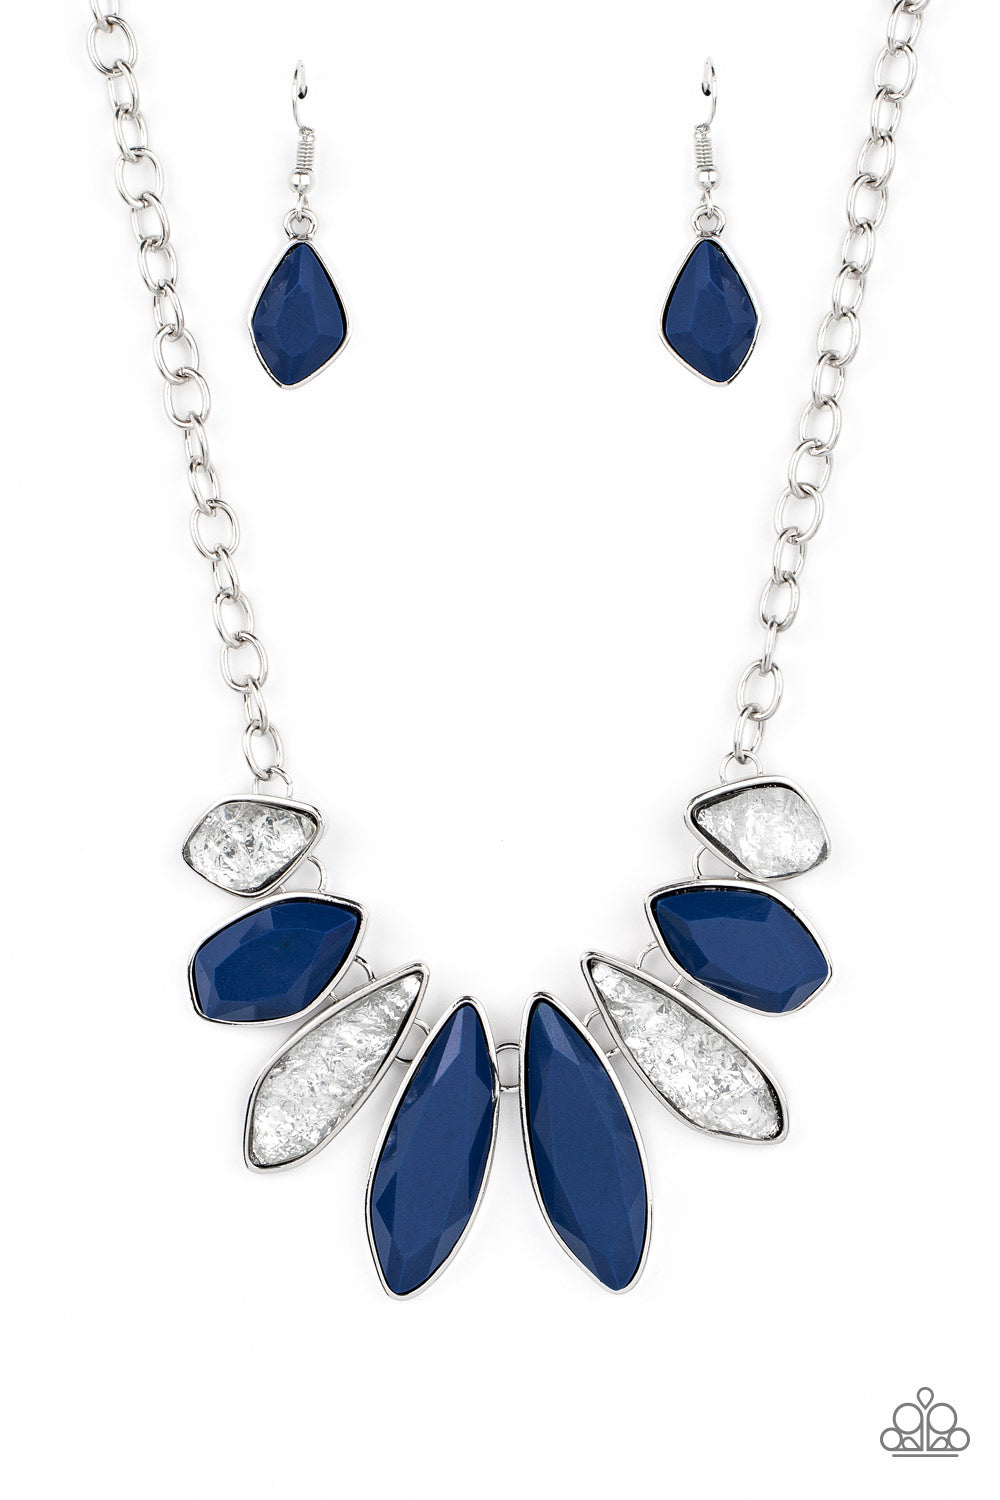 Paparazzi Crystallized Couture - Blue Necklace -Paparazzi Jewelry Images 